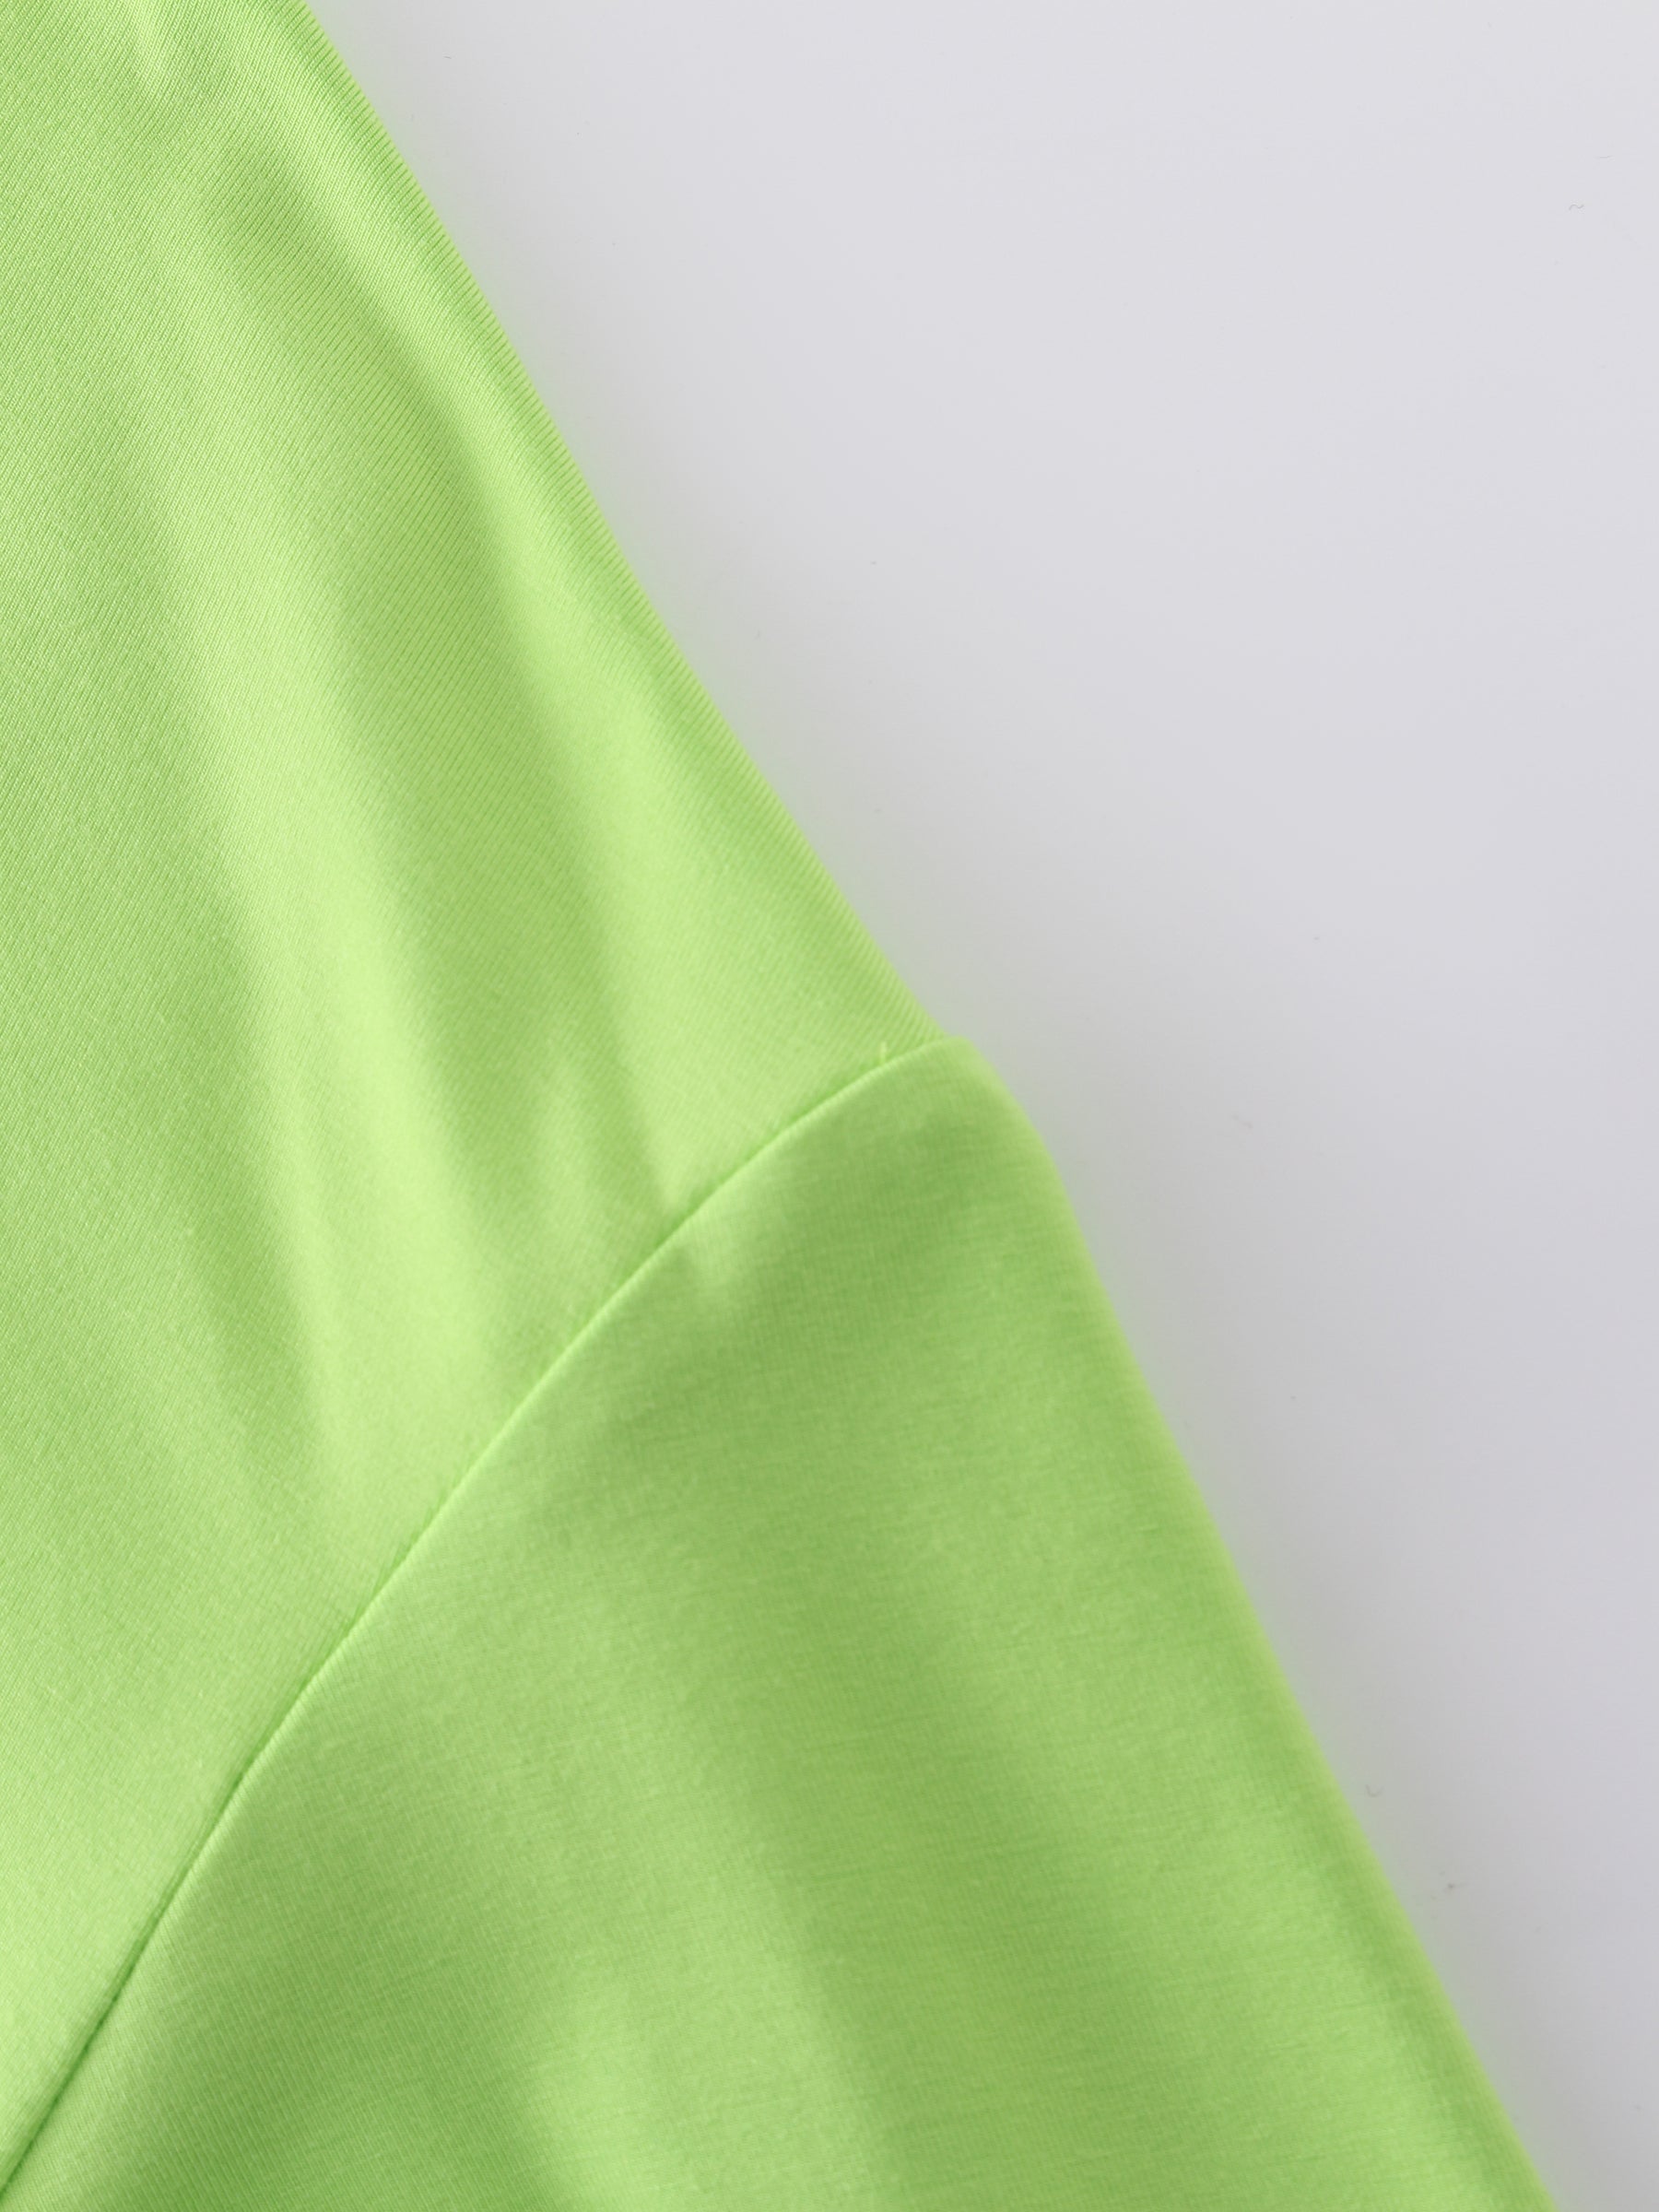 Cropped Tee-Lime Green